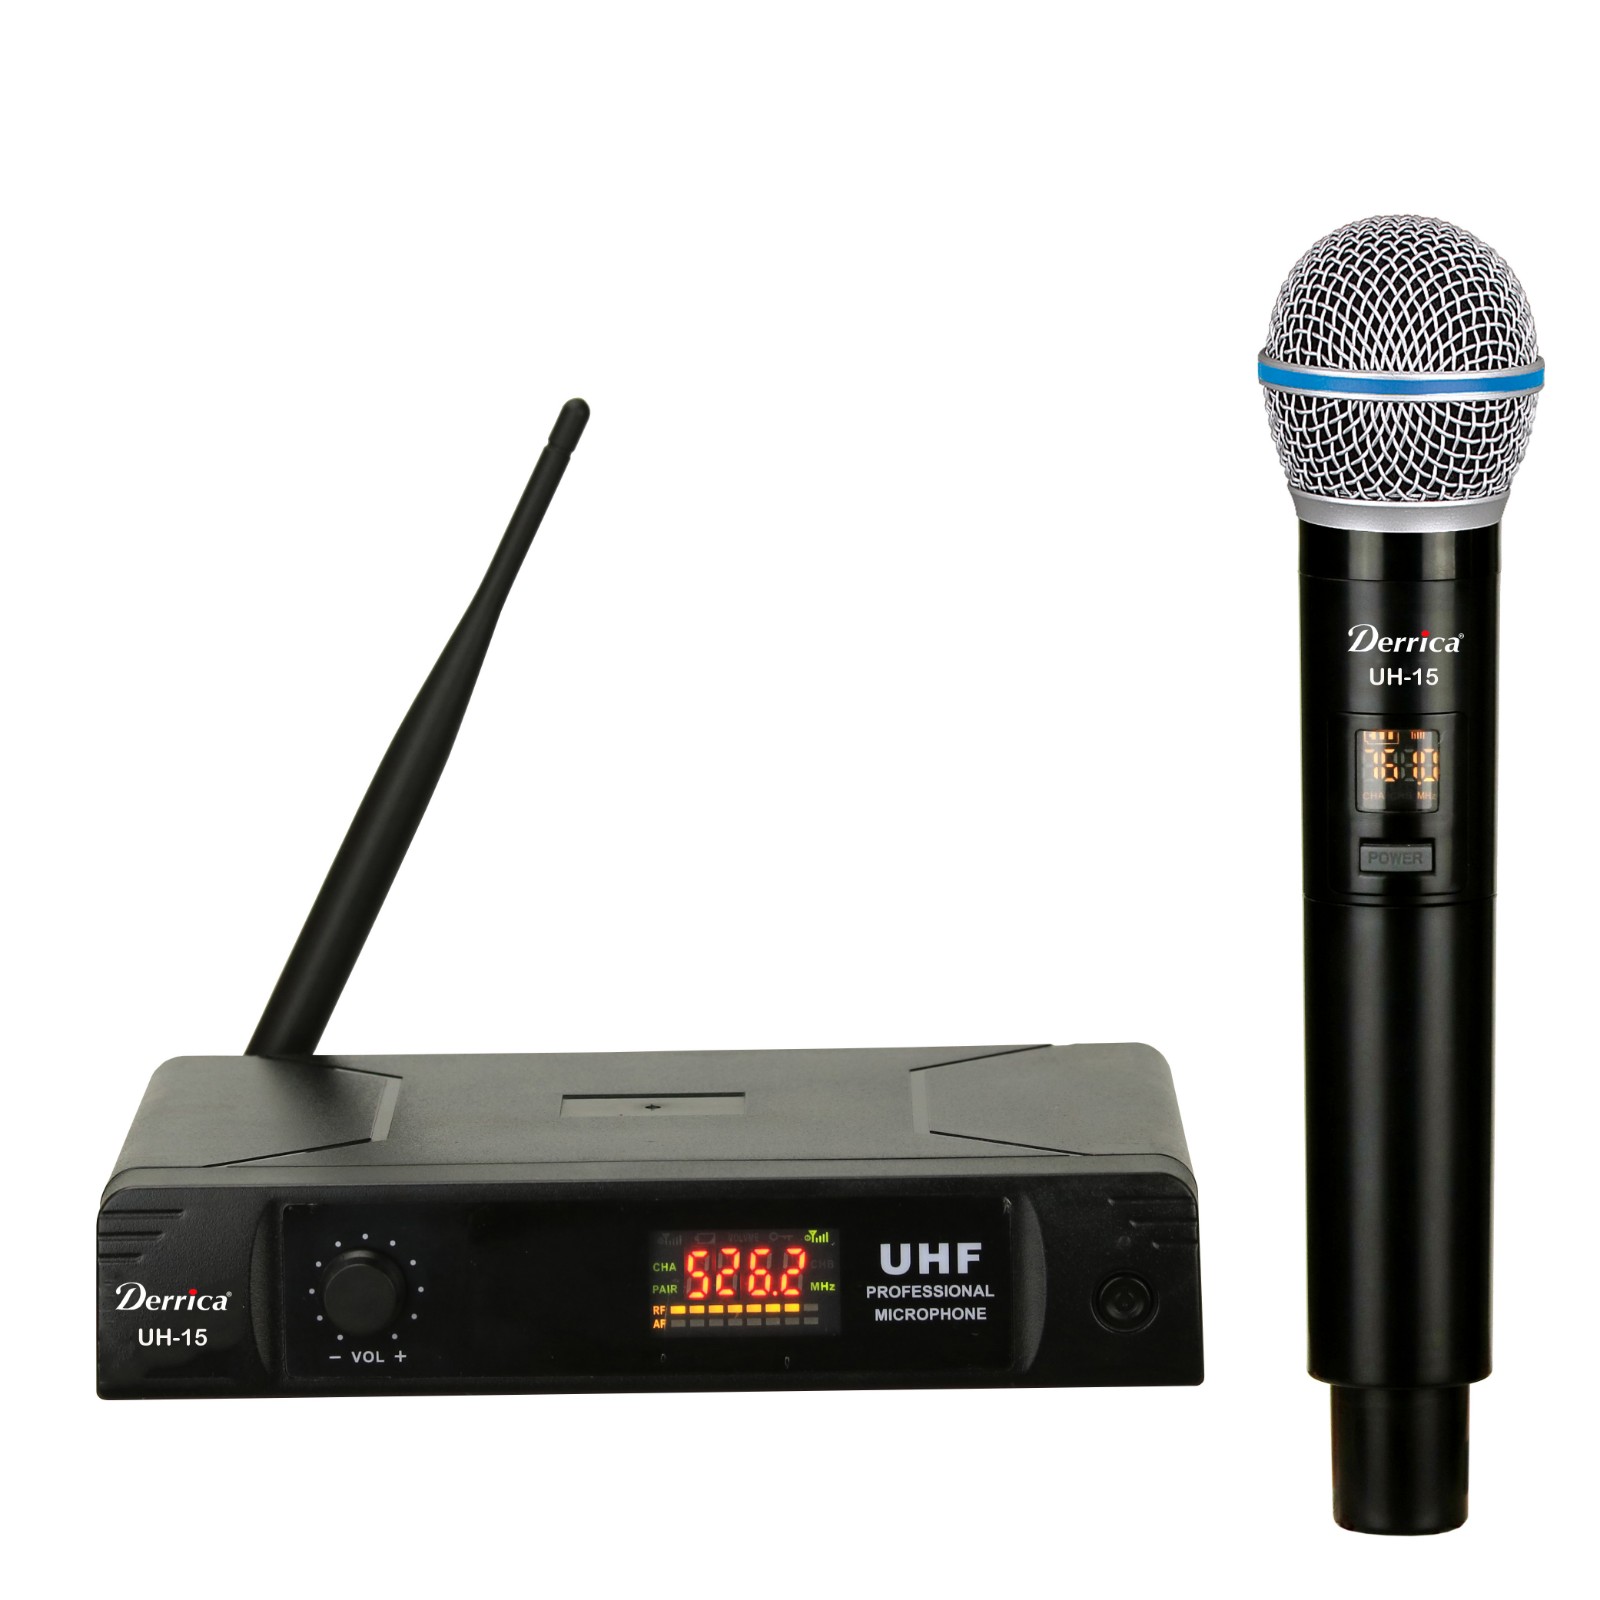 UH-15 Multi-channels UHF wireless microphone